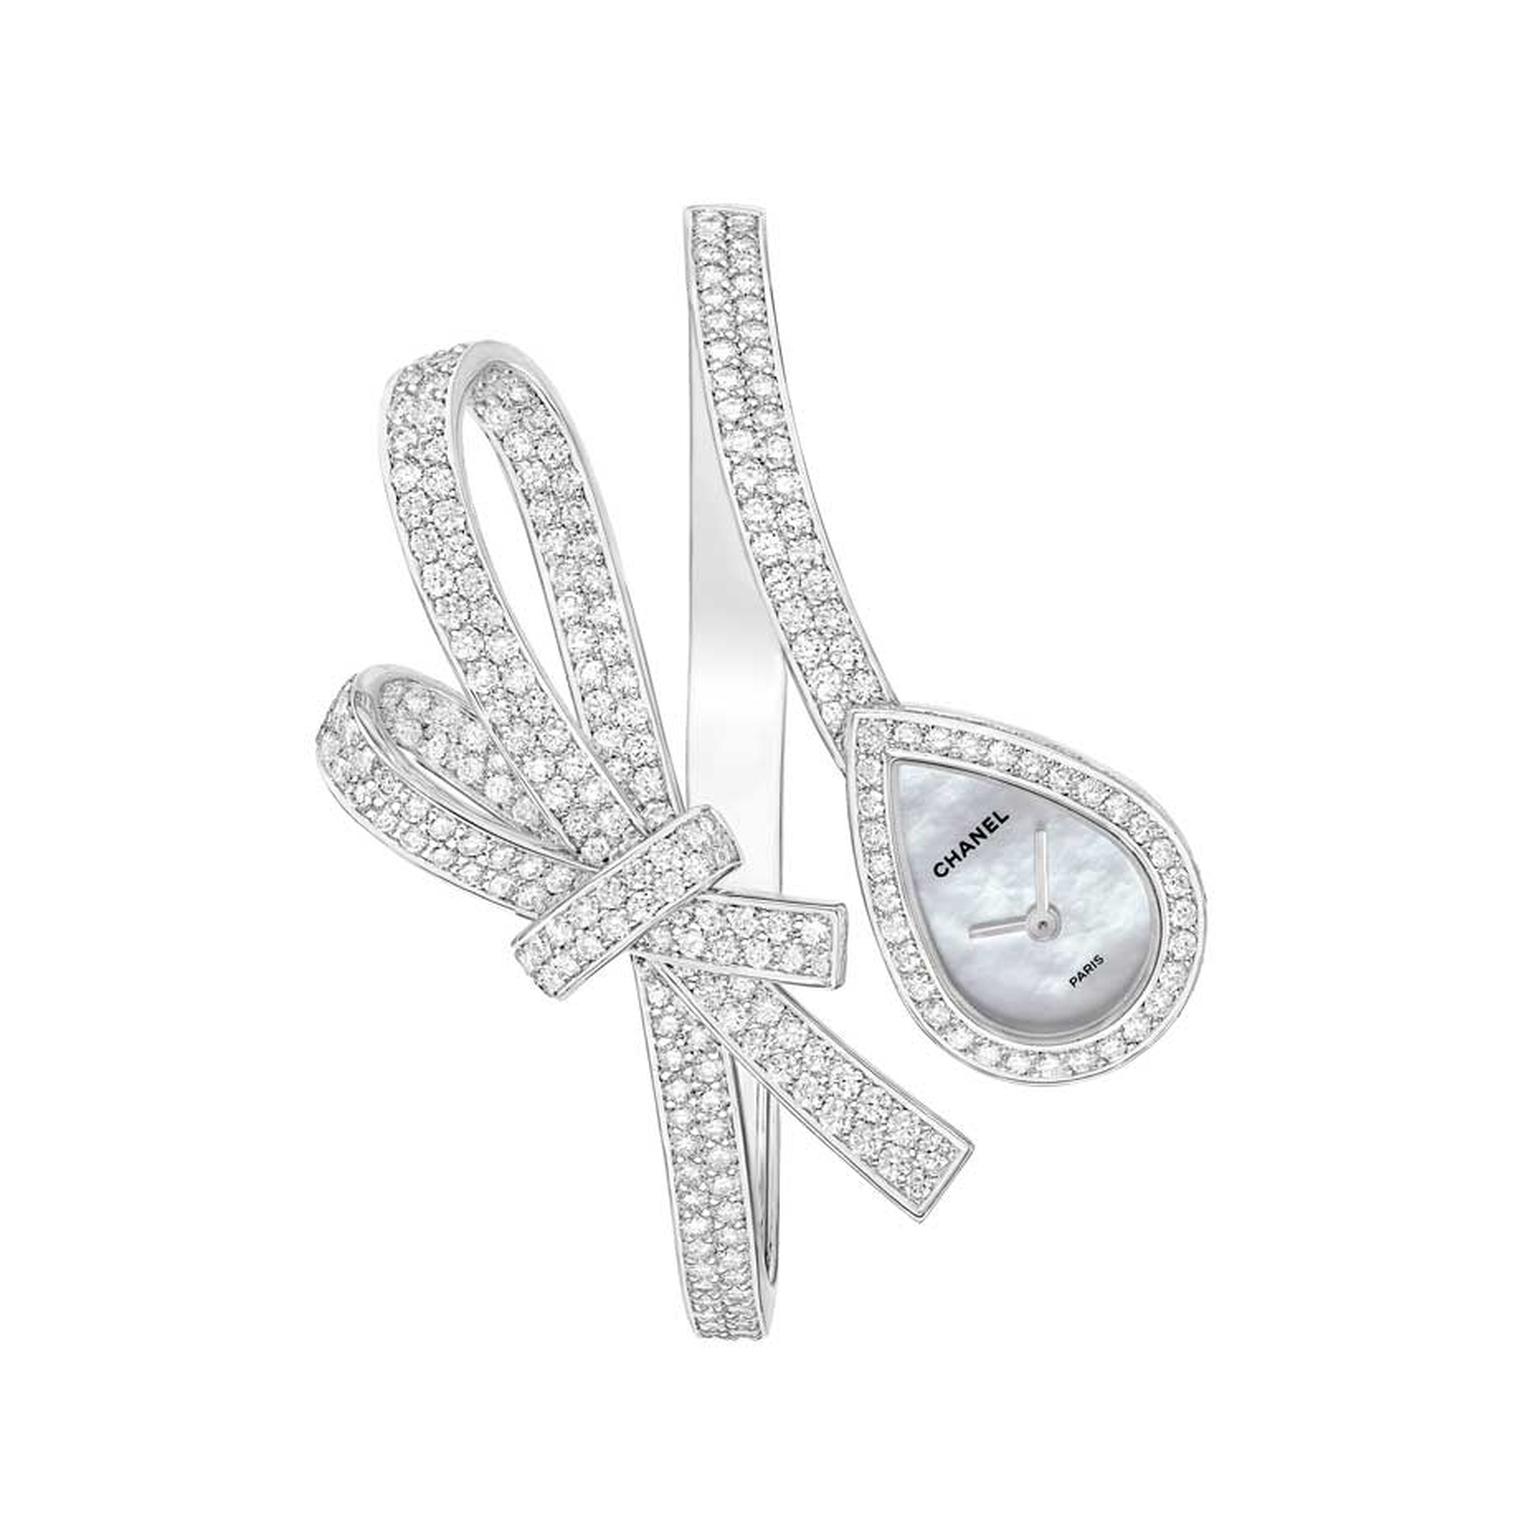 Chanel's diamond watch from the Ruban collection, crafted in